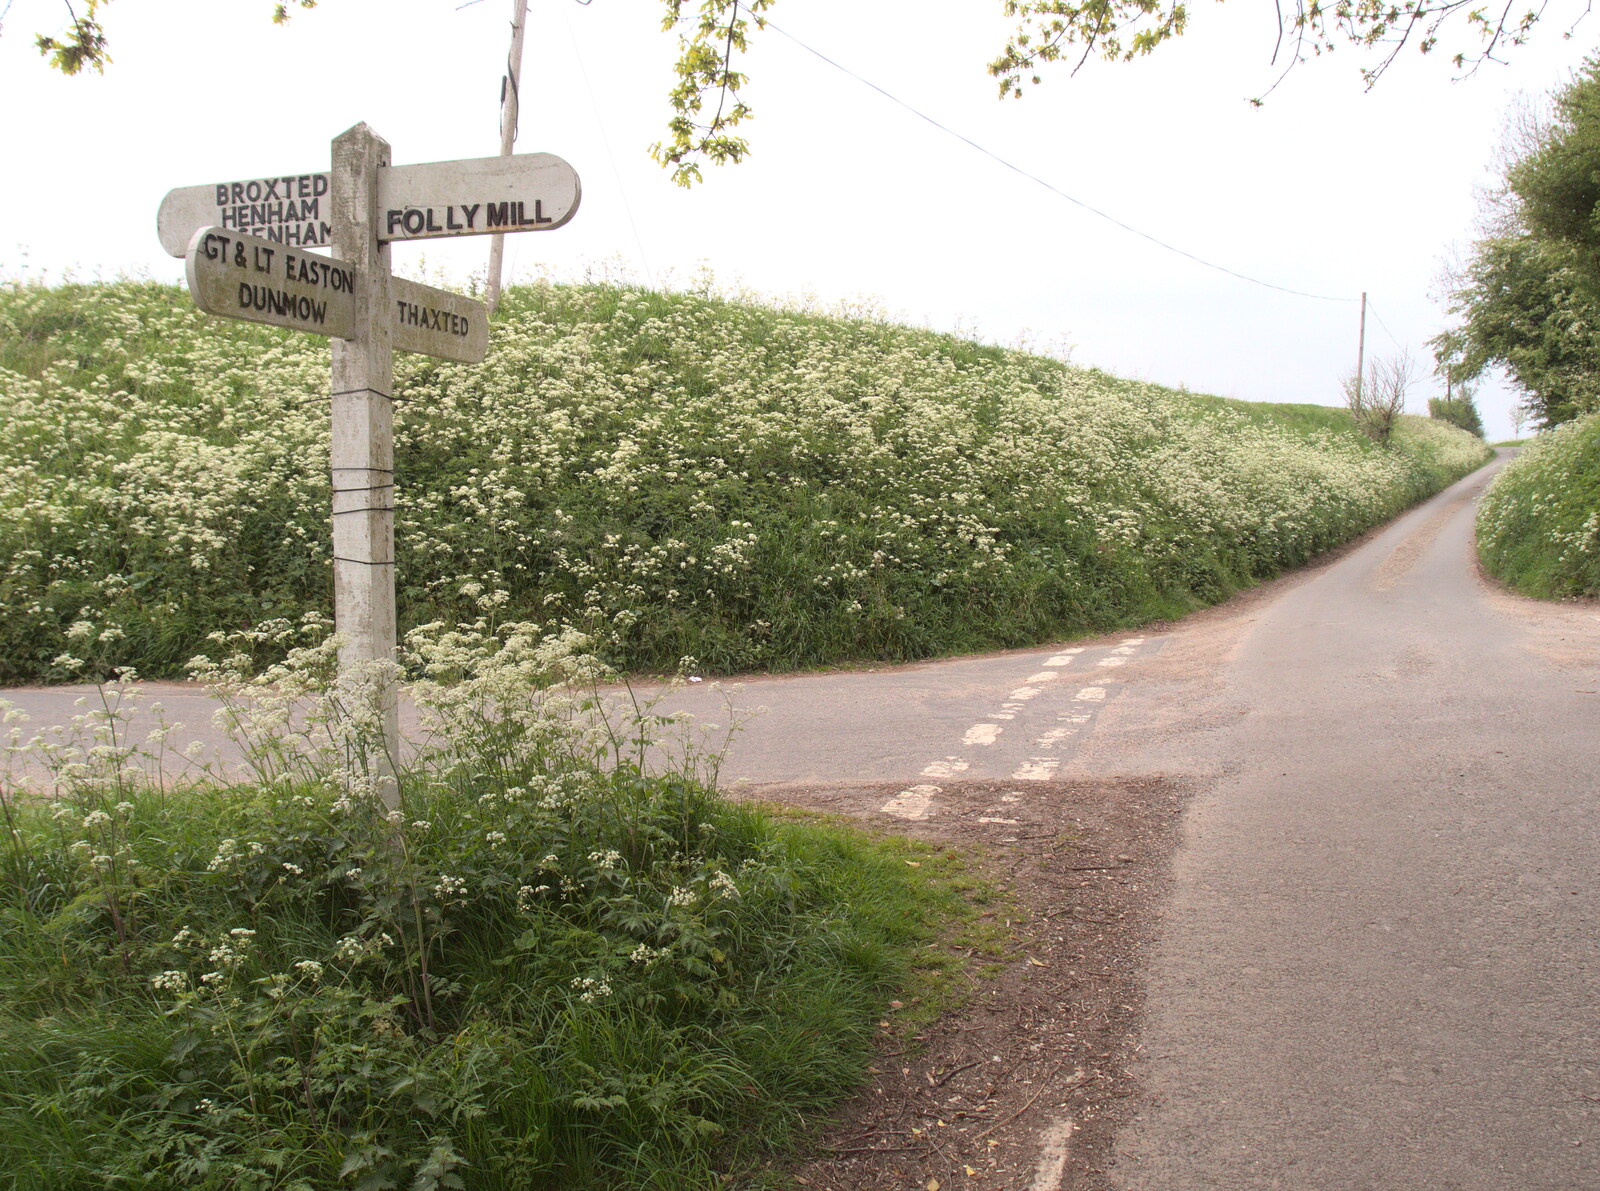 Old-school road sign near Folly Mill from The Last-Ever BSCC Weekend Away Bike Ride, Thaxted, Essex - 6th May 2017